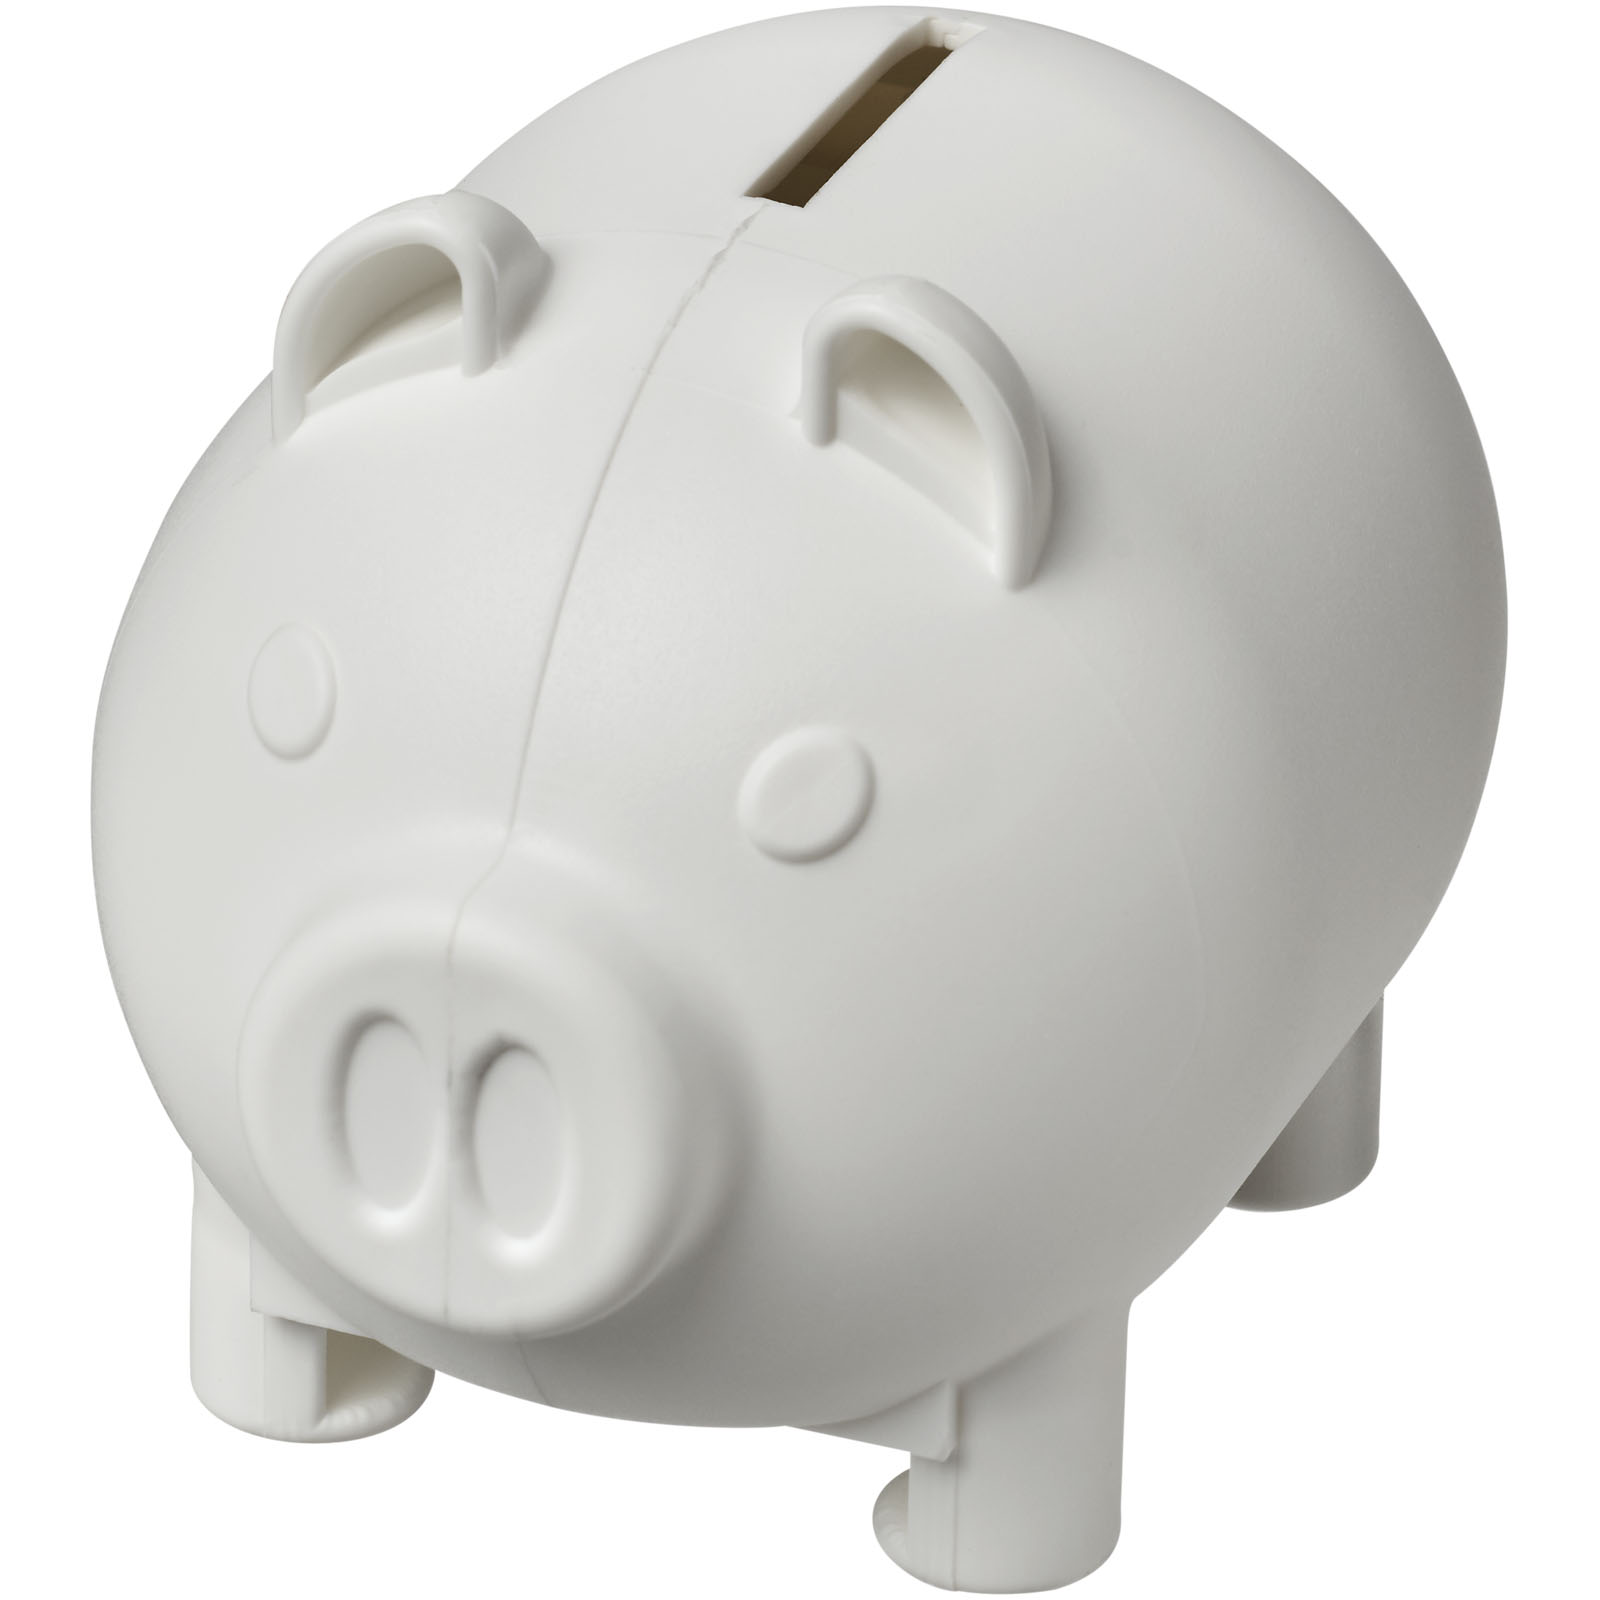 Advertising Home Accessories - Oink recycled plastic piggy bank